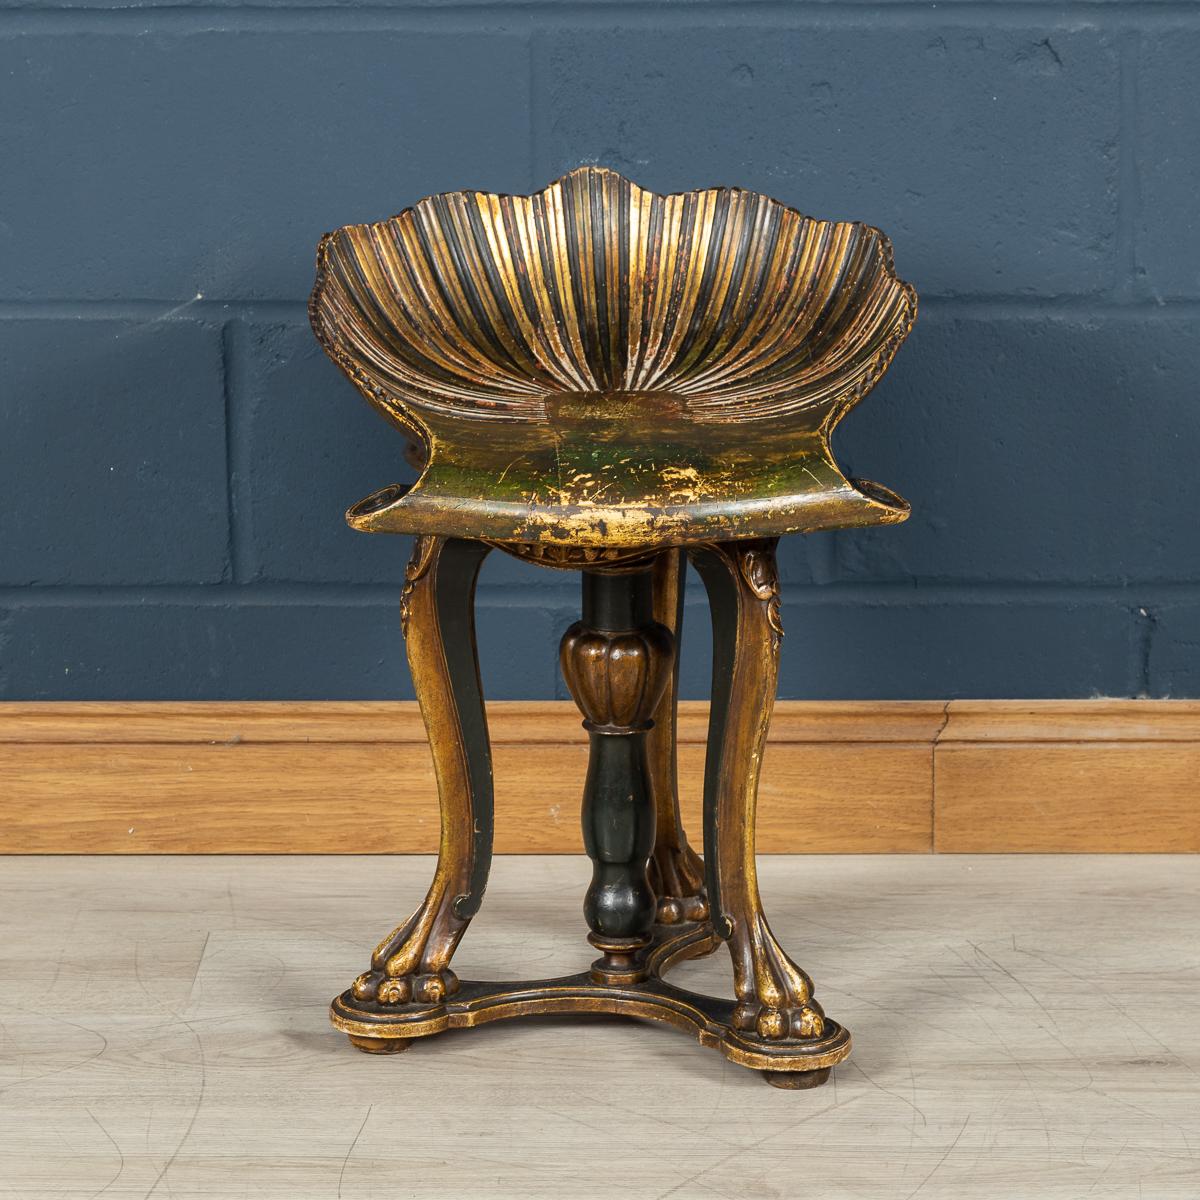 A beautiful carved antique fruitwood grotto stool, polychrome-decorated, the bench standing on cabriole legs joined with a bottom stretcher, and bun feet reminiscent of animal paws made in Venice around the turn of the 19th century. The seat has a